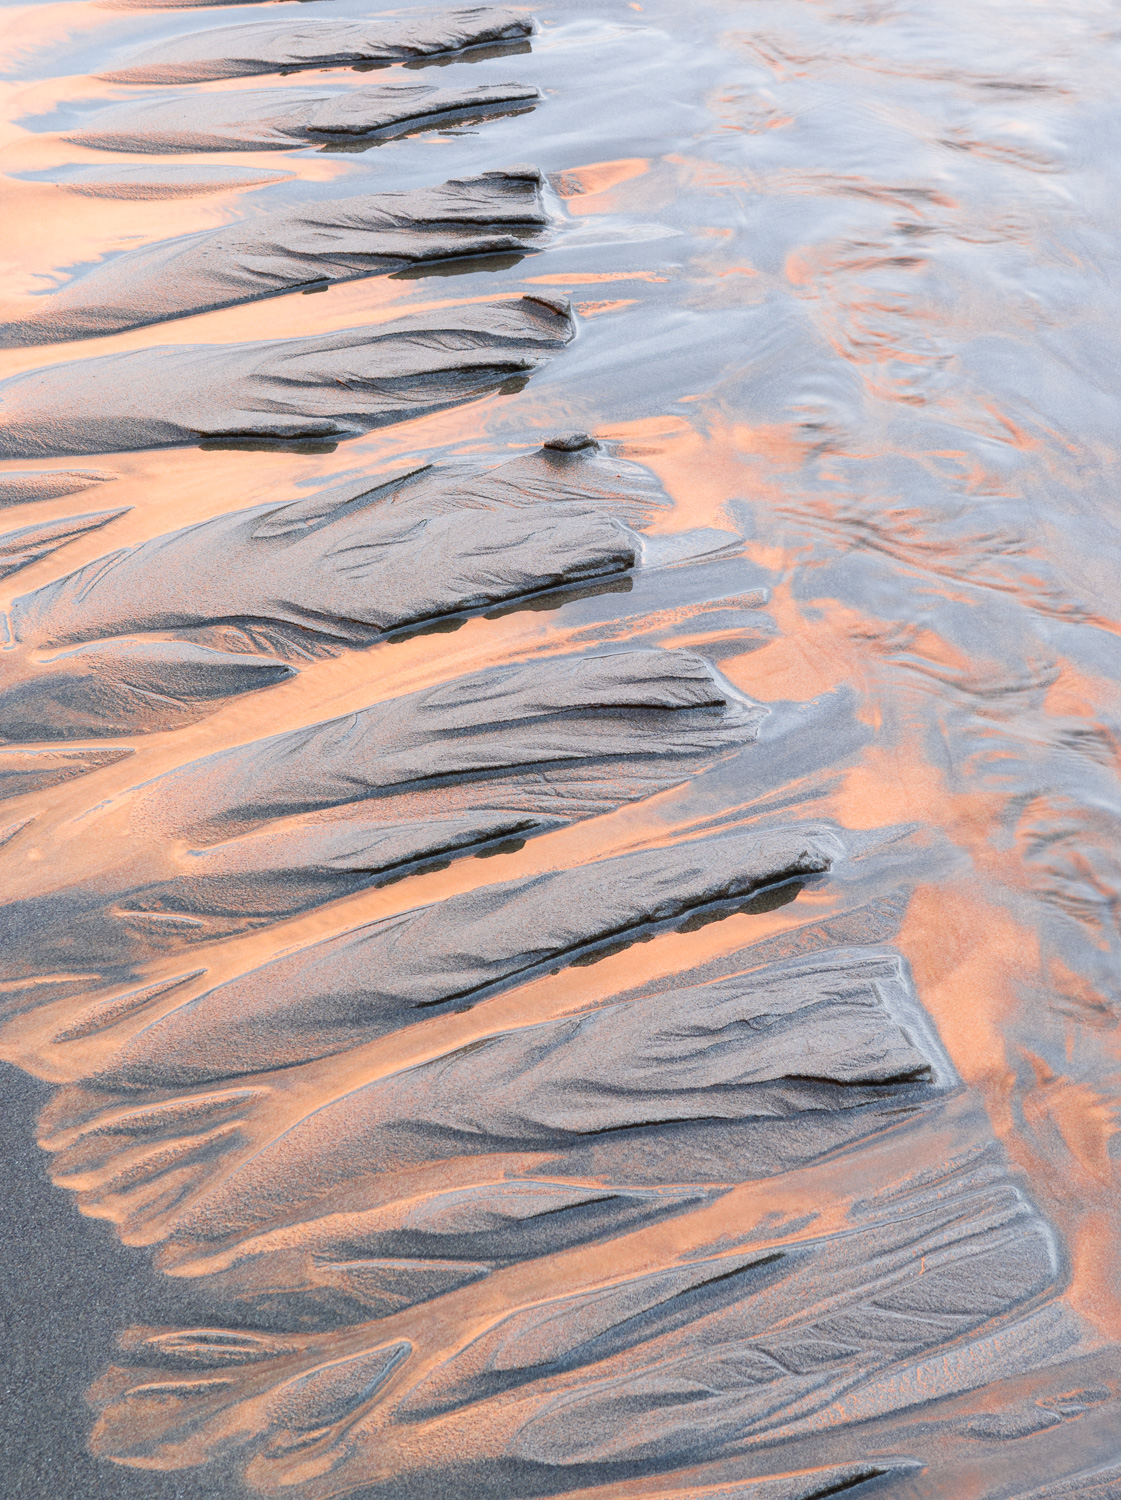 Sunset colors reflect off the wet sand of Second Beach; Olympic National Park, Washington coast Image #743